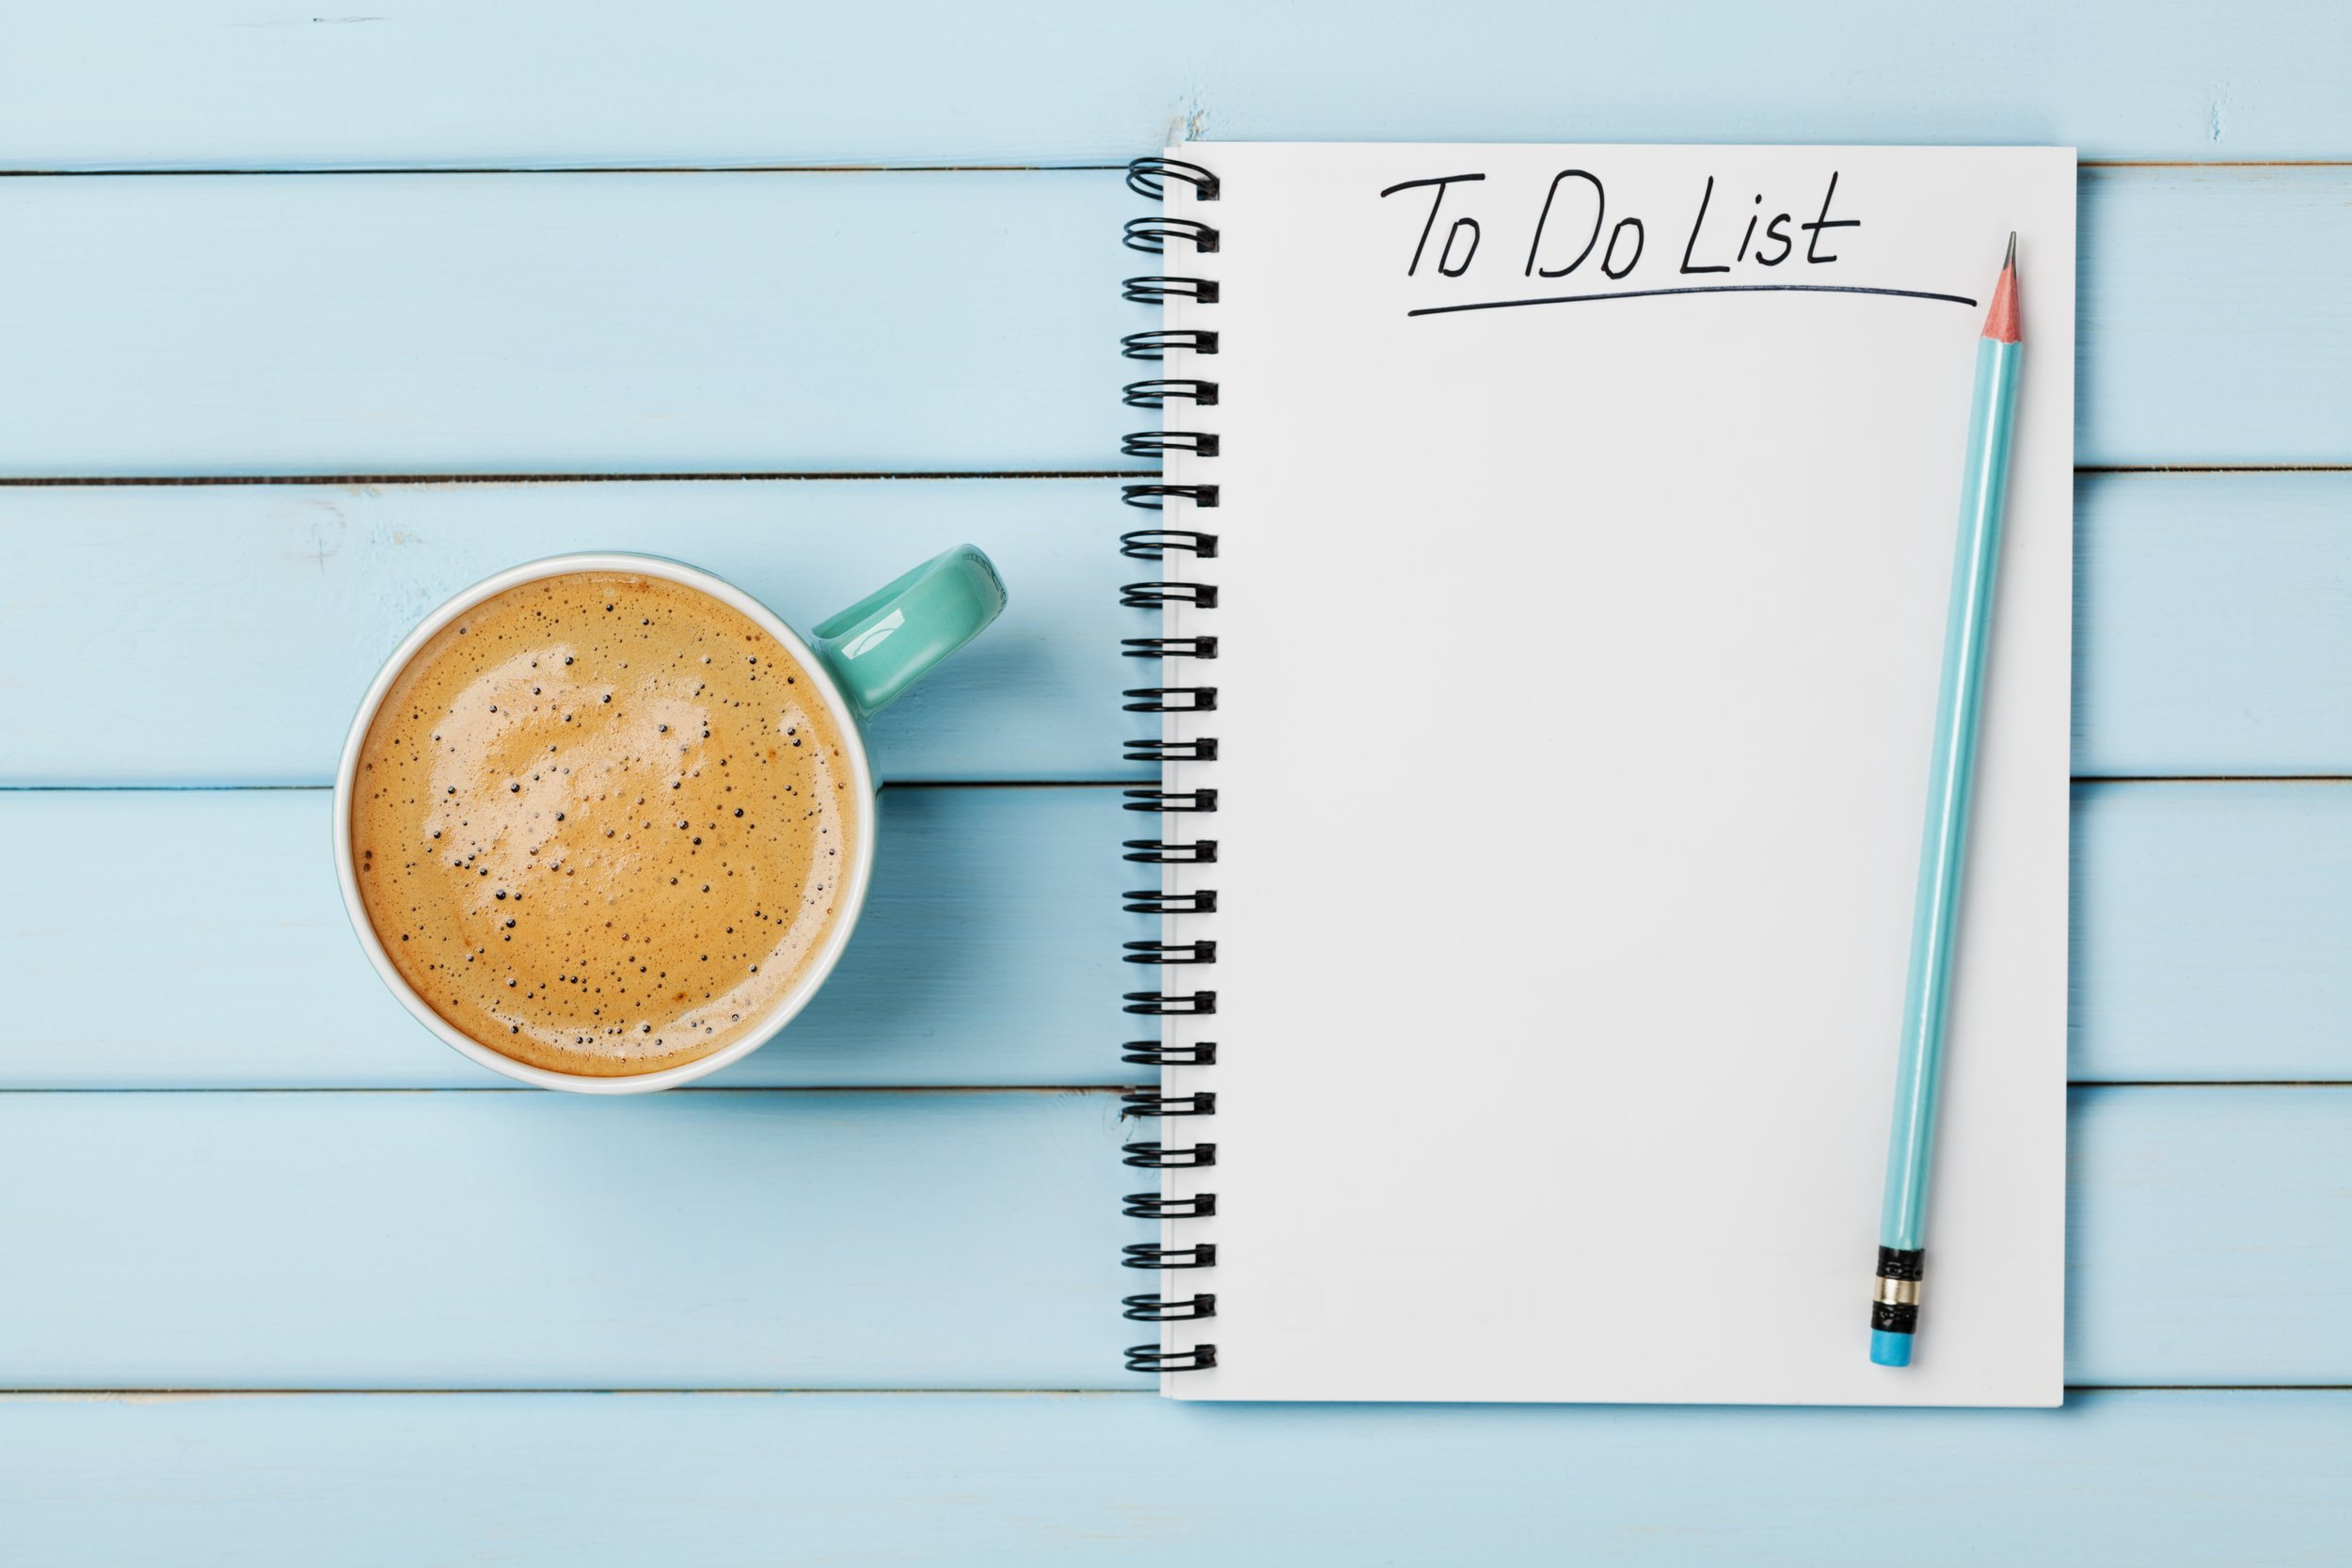 Have you bumped your check up down the to do list?